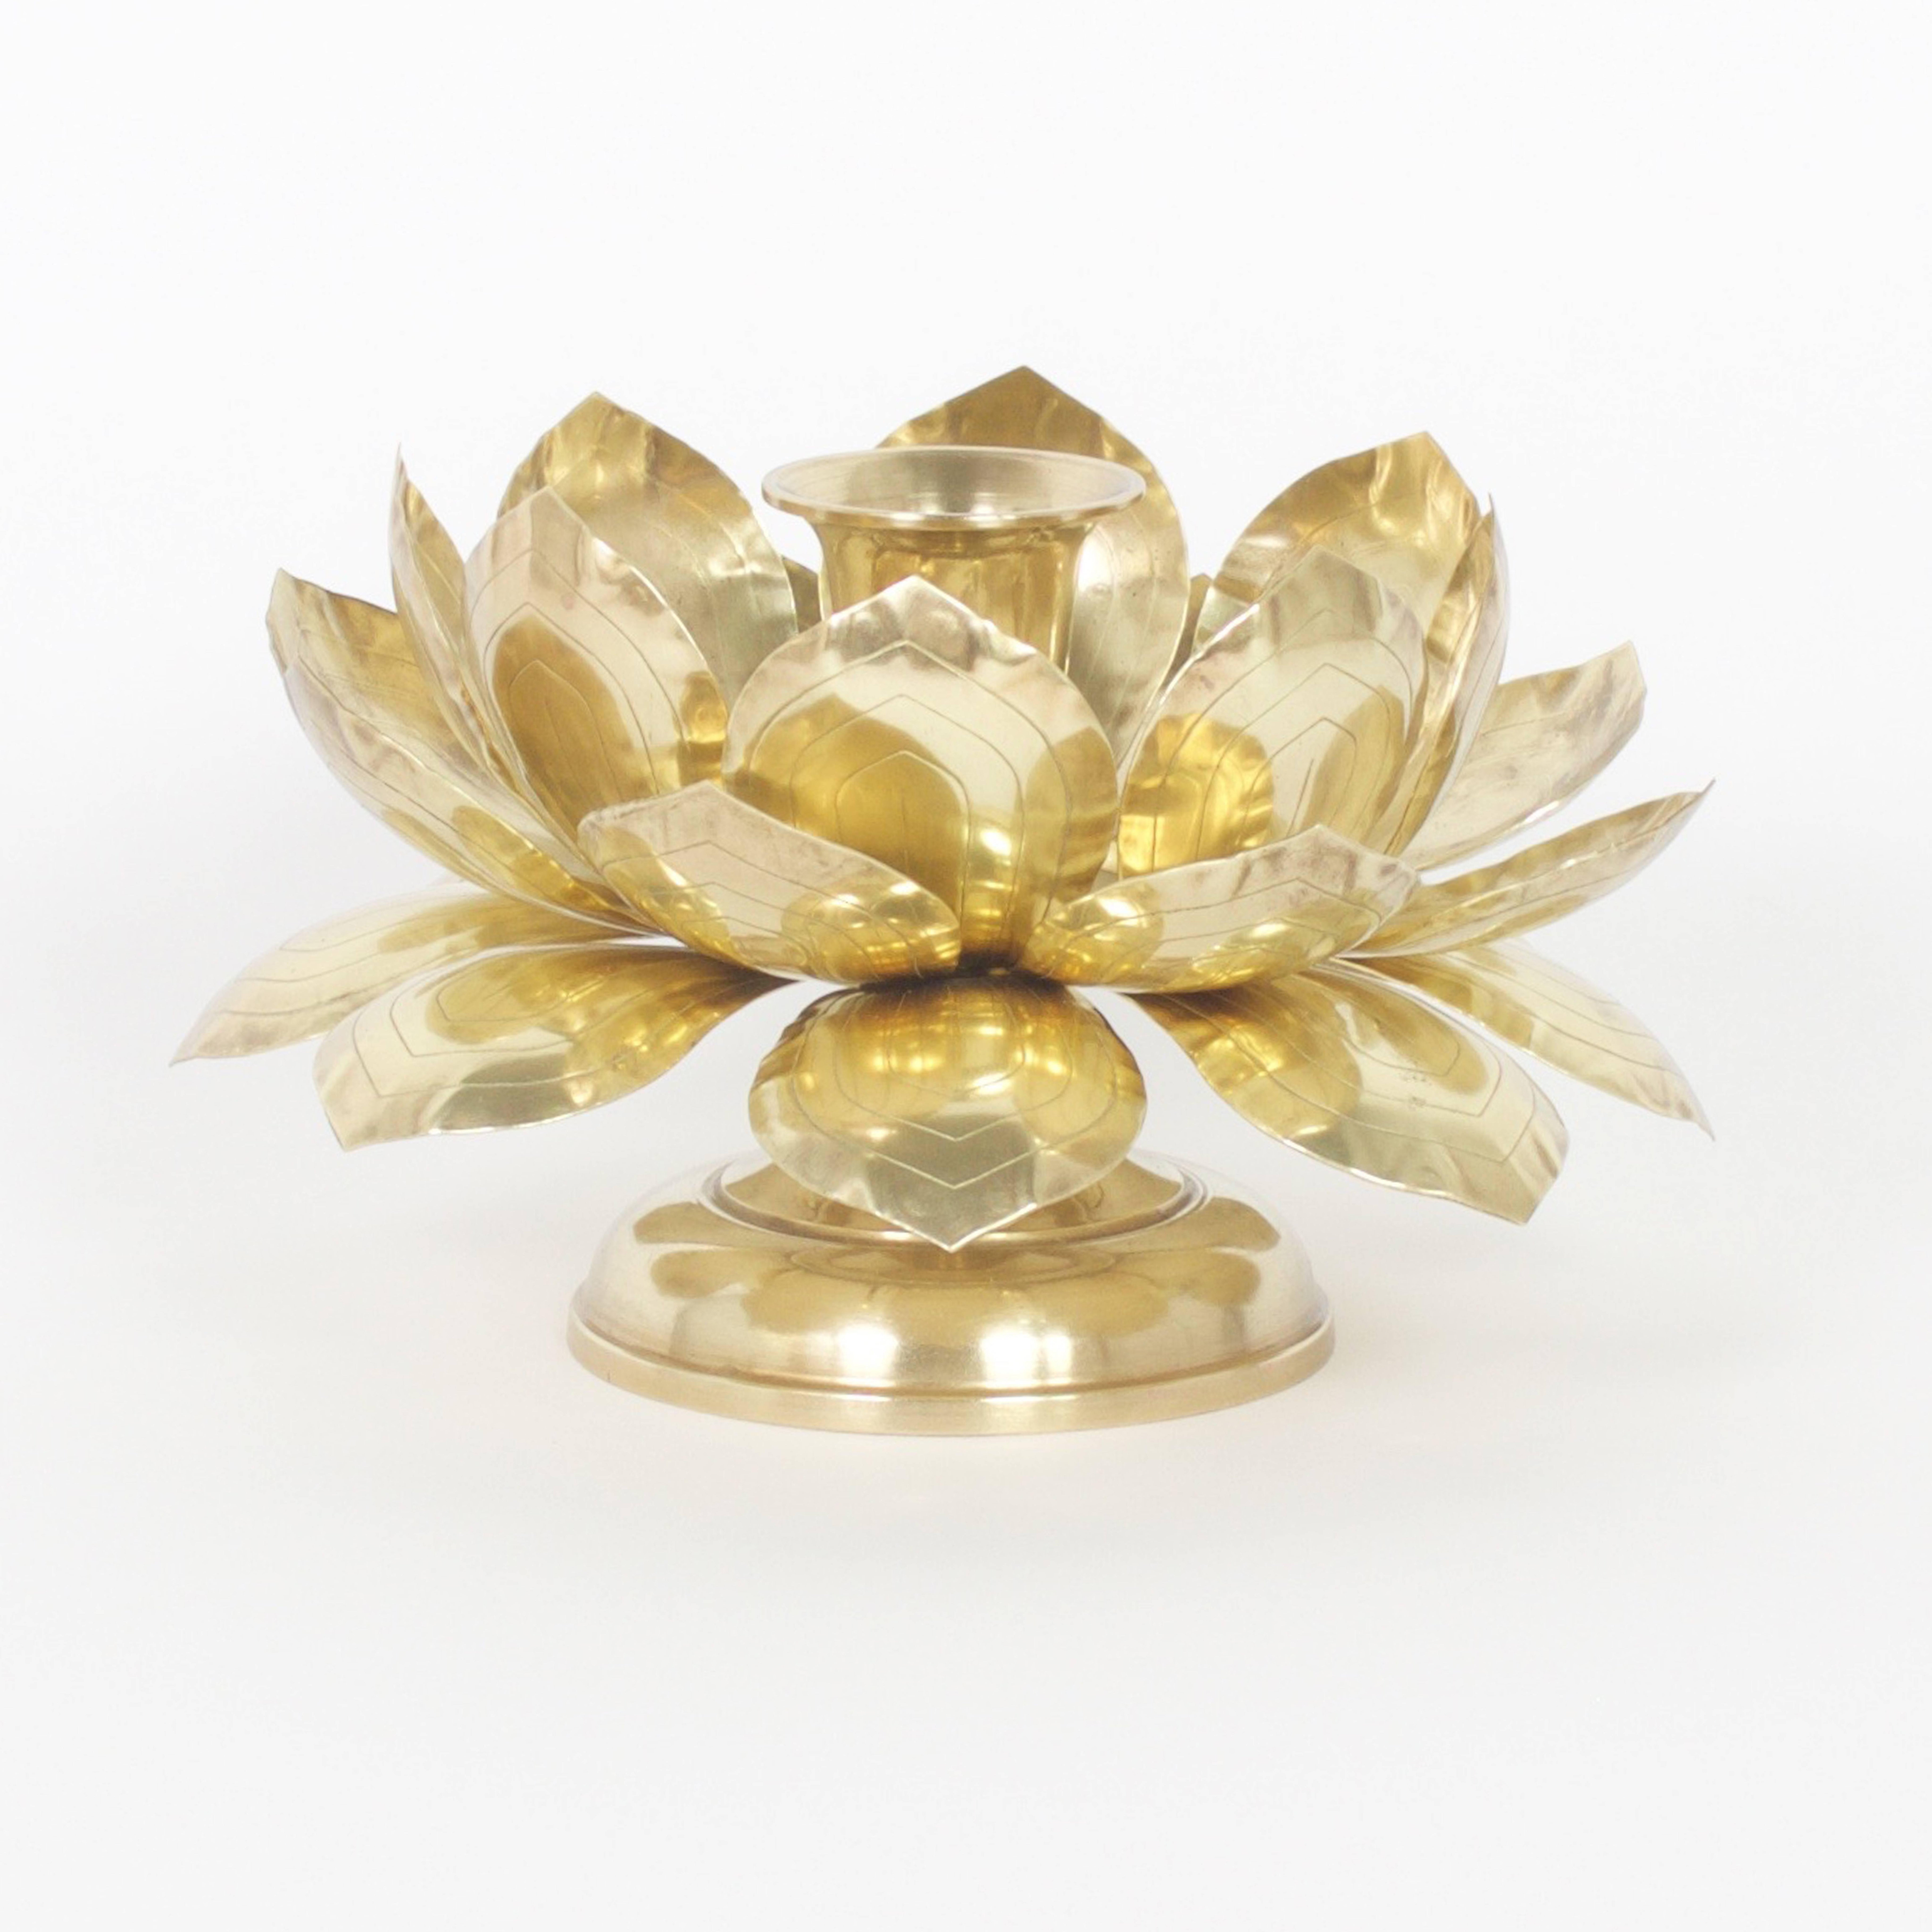 Pair of Mid-Century brass candleholders with three layers of lotus leaves over a classical turned foot, all holding a candle cup in the center. Set a romantic mood at your next intimate dinner party. Probably Feldman. 

.
 